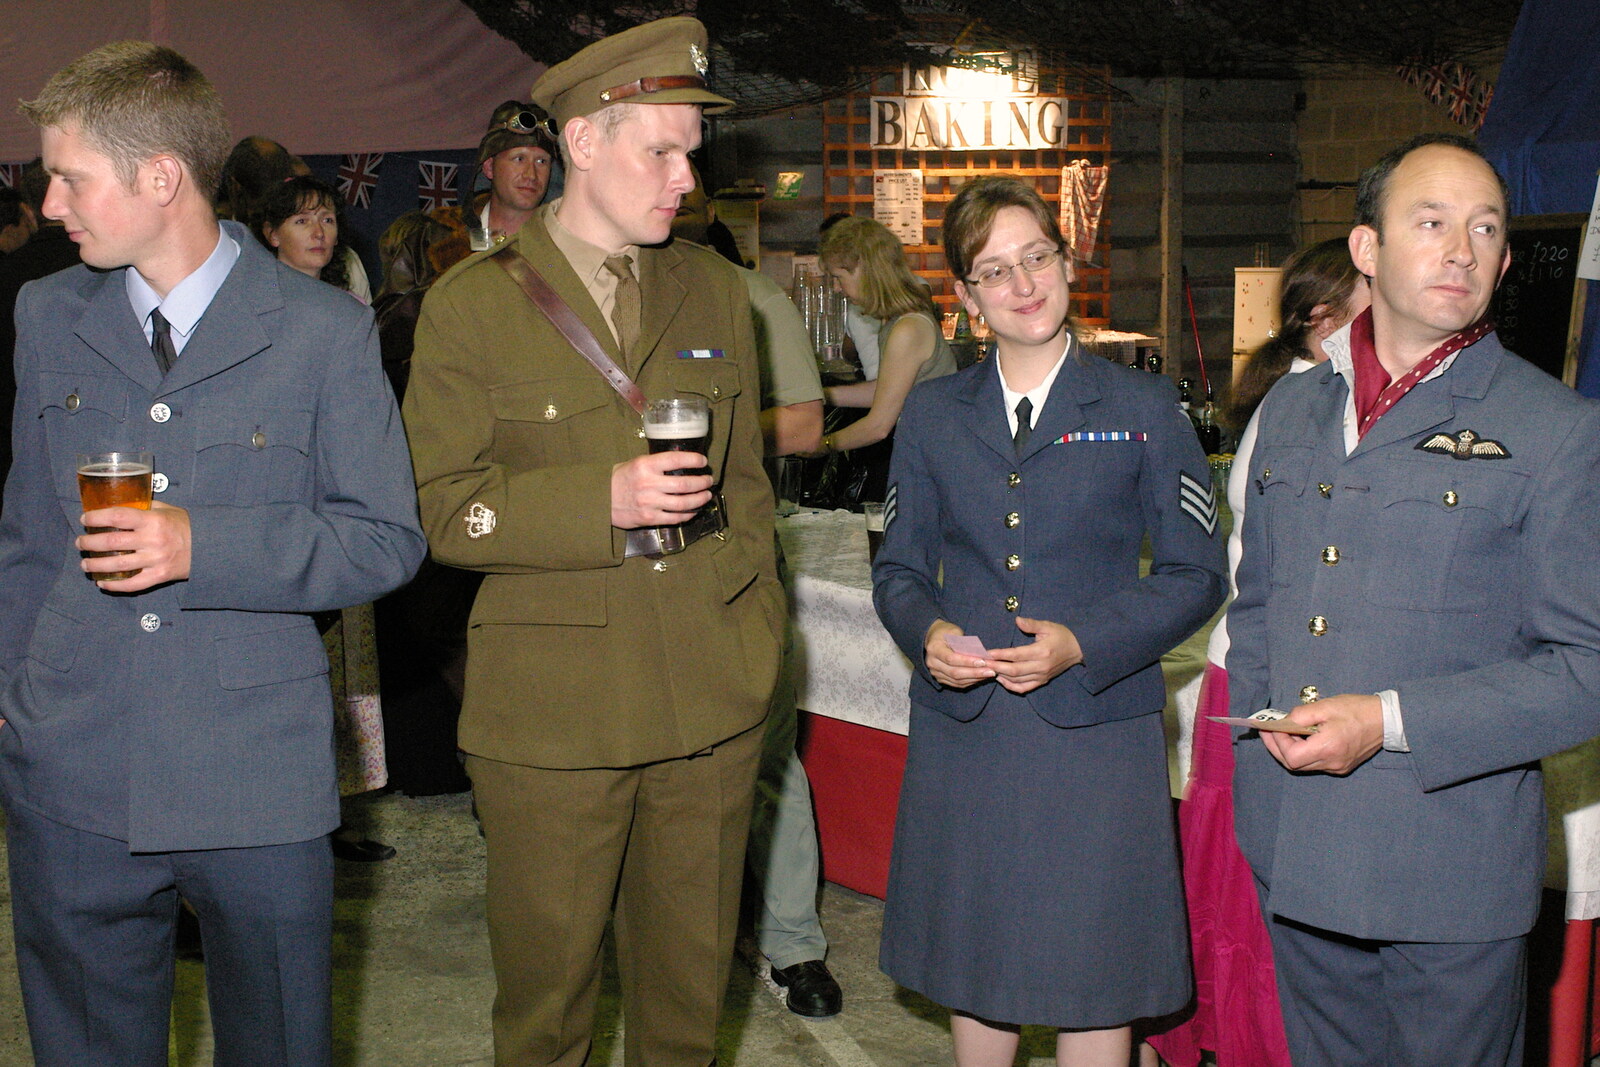 Phil, Bill, Suey and DH from Another 1940s Dance, Ellough Airfield, Beccles, Suffolk - 24th June 2005